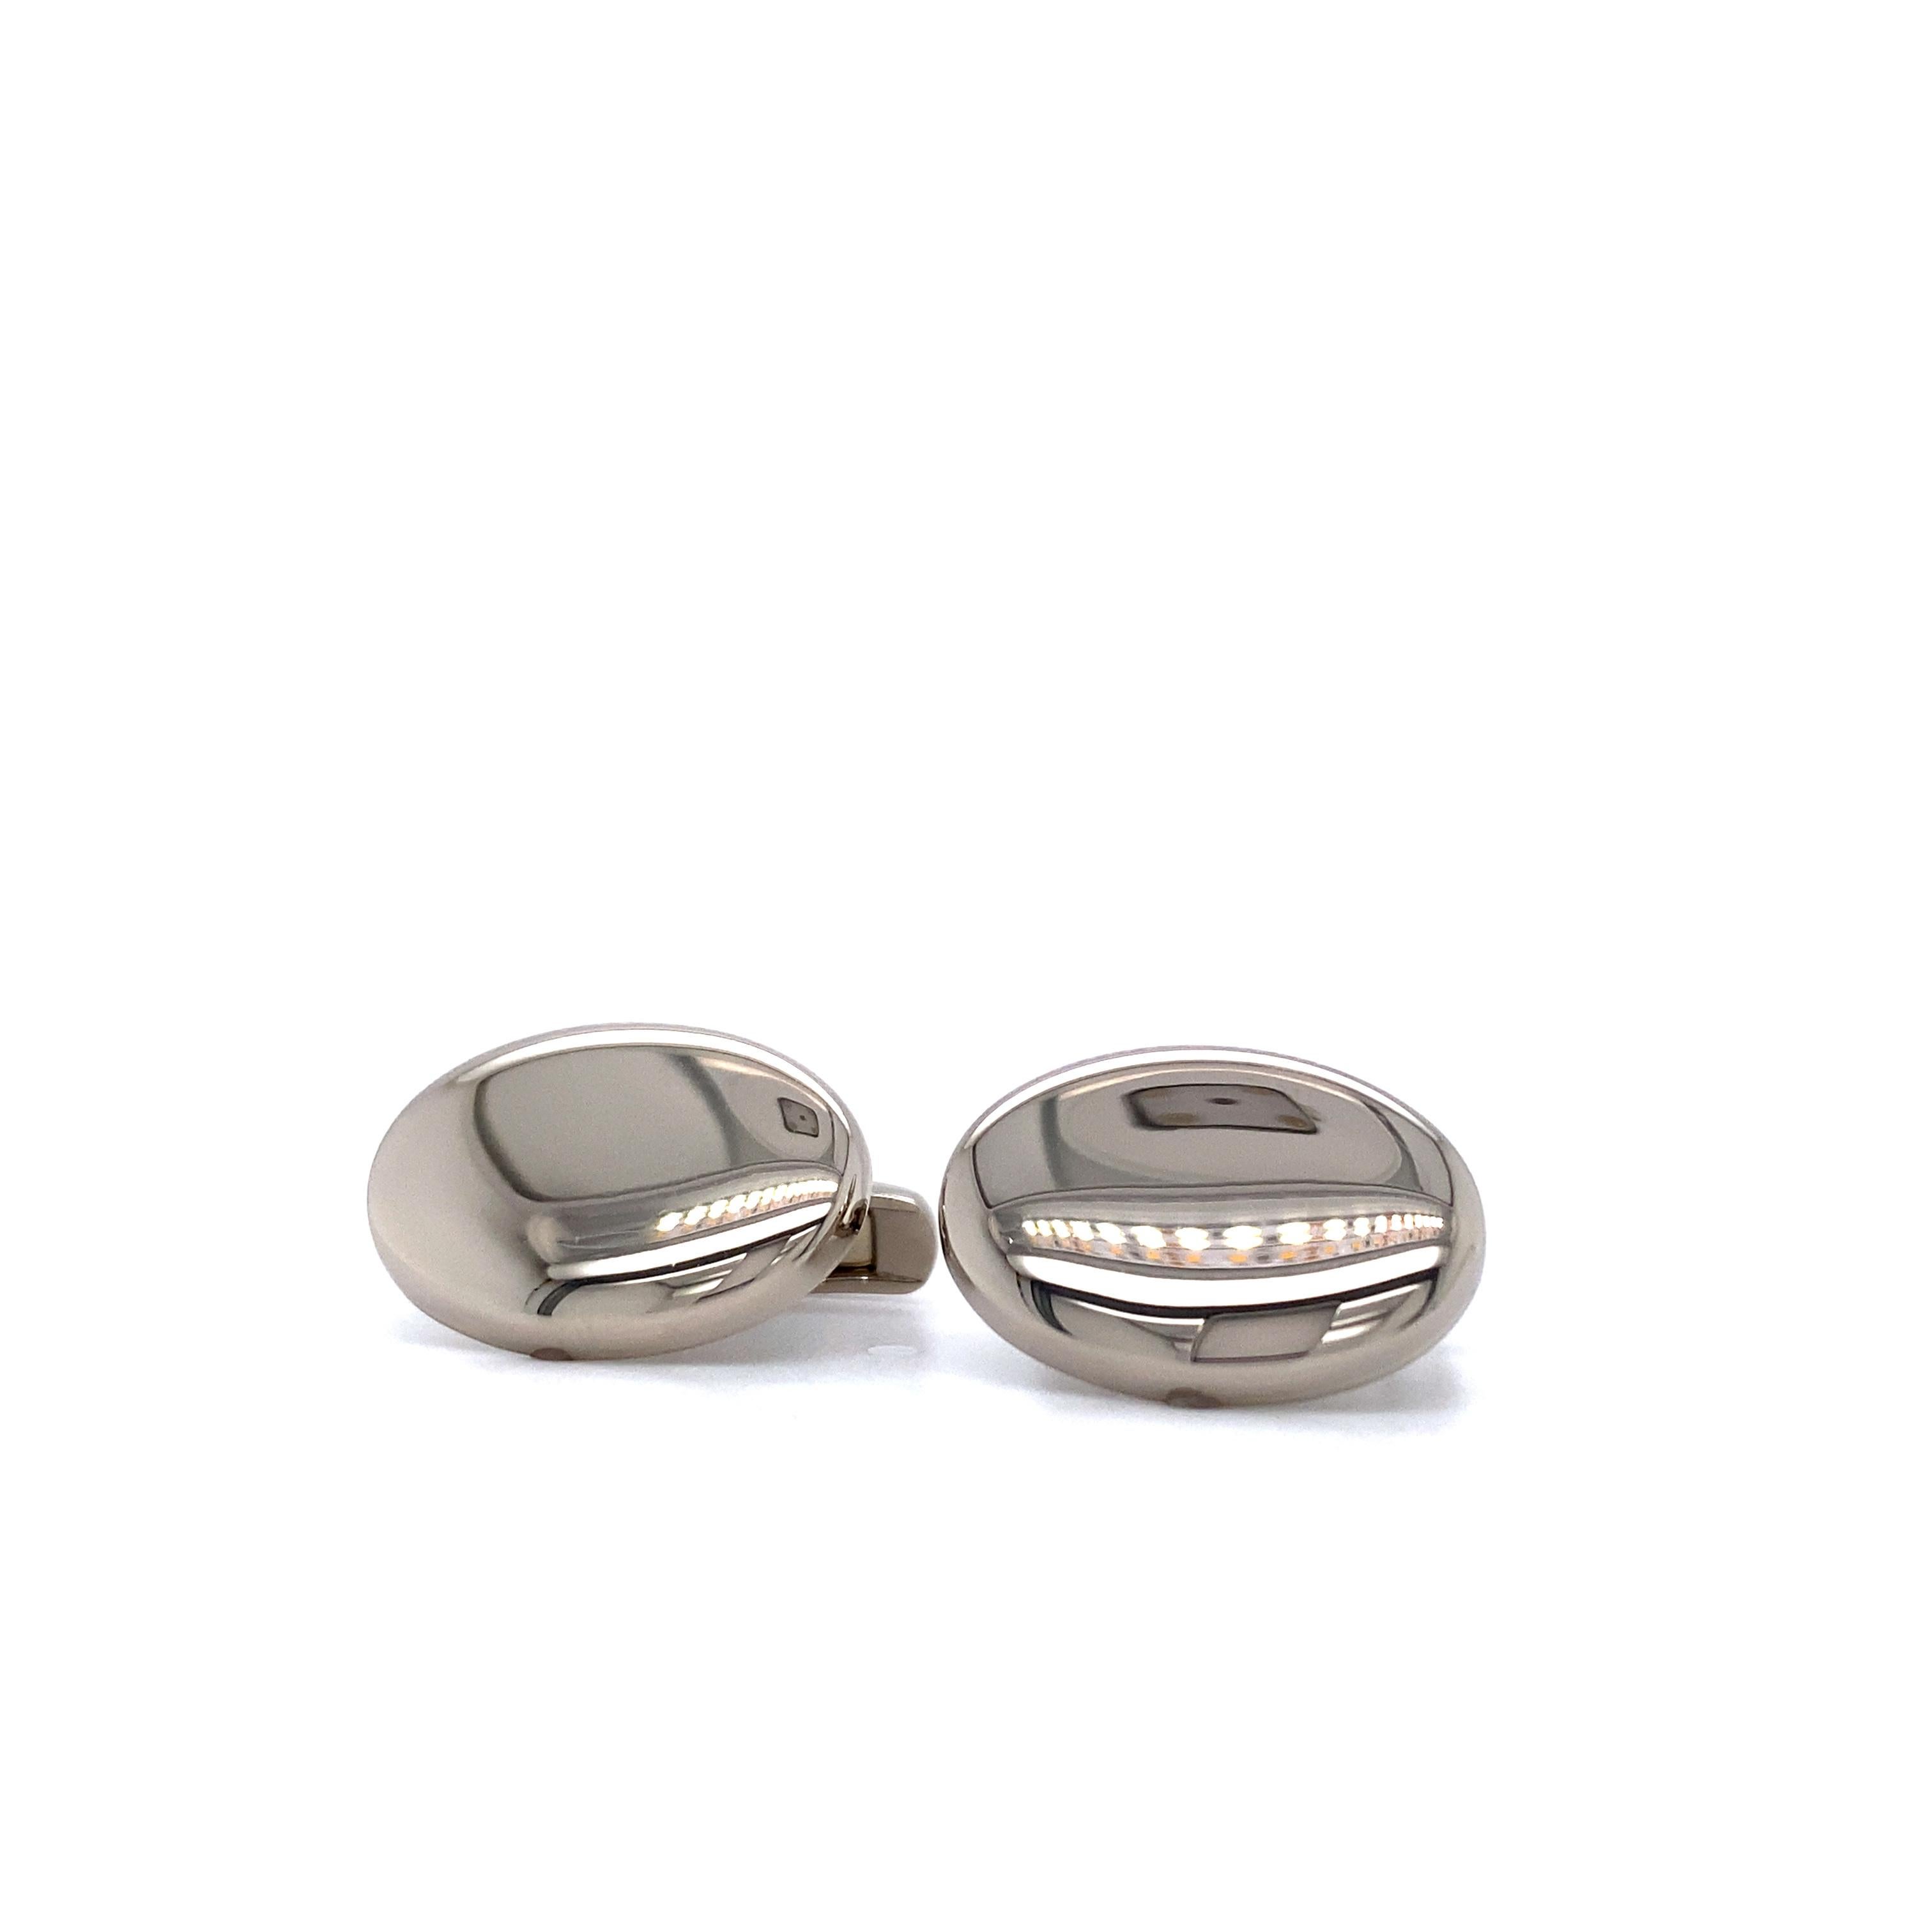 Women's or Men's Oval Cufflinks - 18k Palladium White Gold - Highly Polished - 15.7 mm x 20.8 mm For Sale